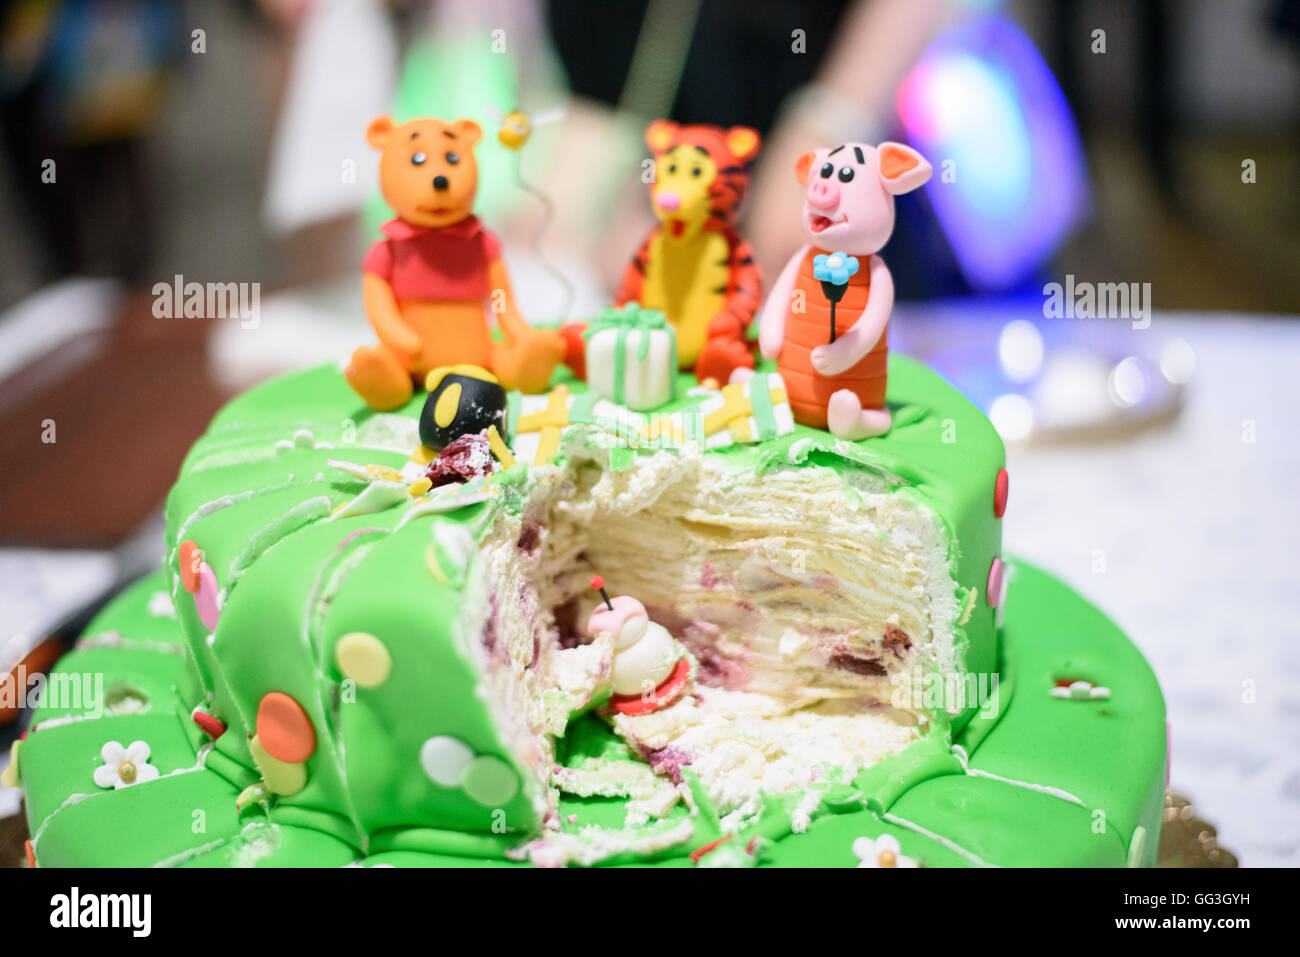 Birthday cake with candles and Winnie the Pooh by Disney Stock Photo